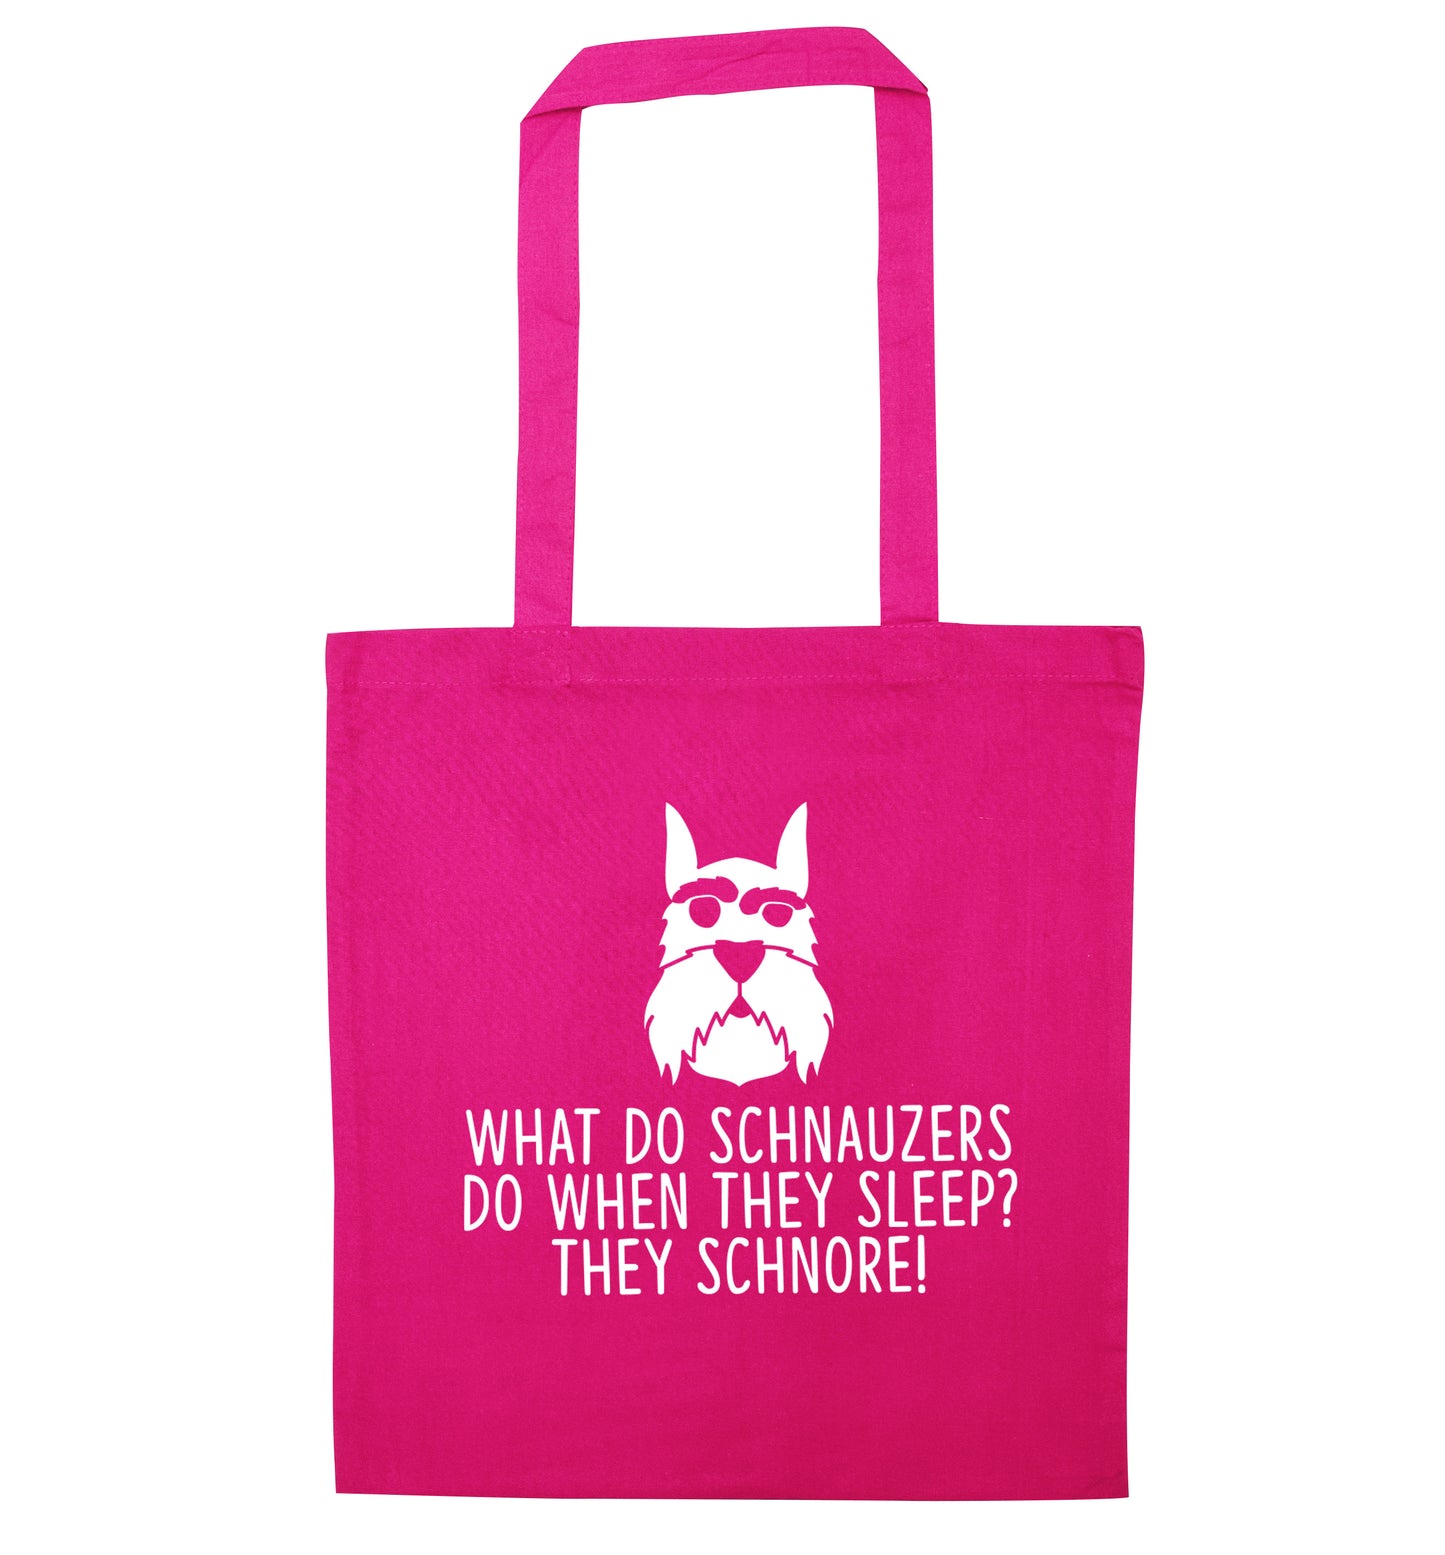 What do schnauzers do when they sleep? Schnore! pink tote bag